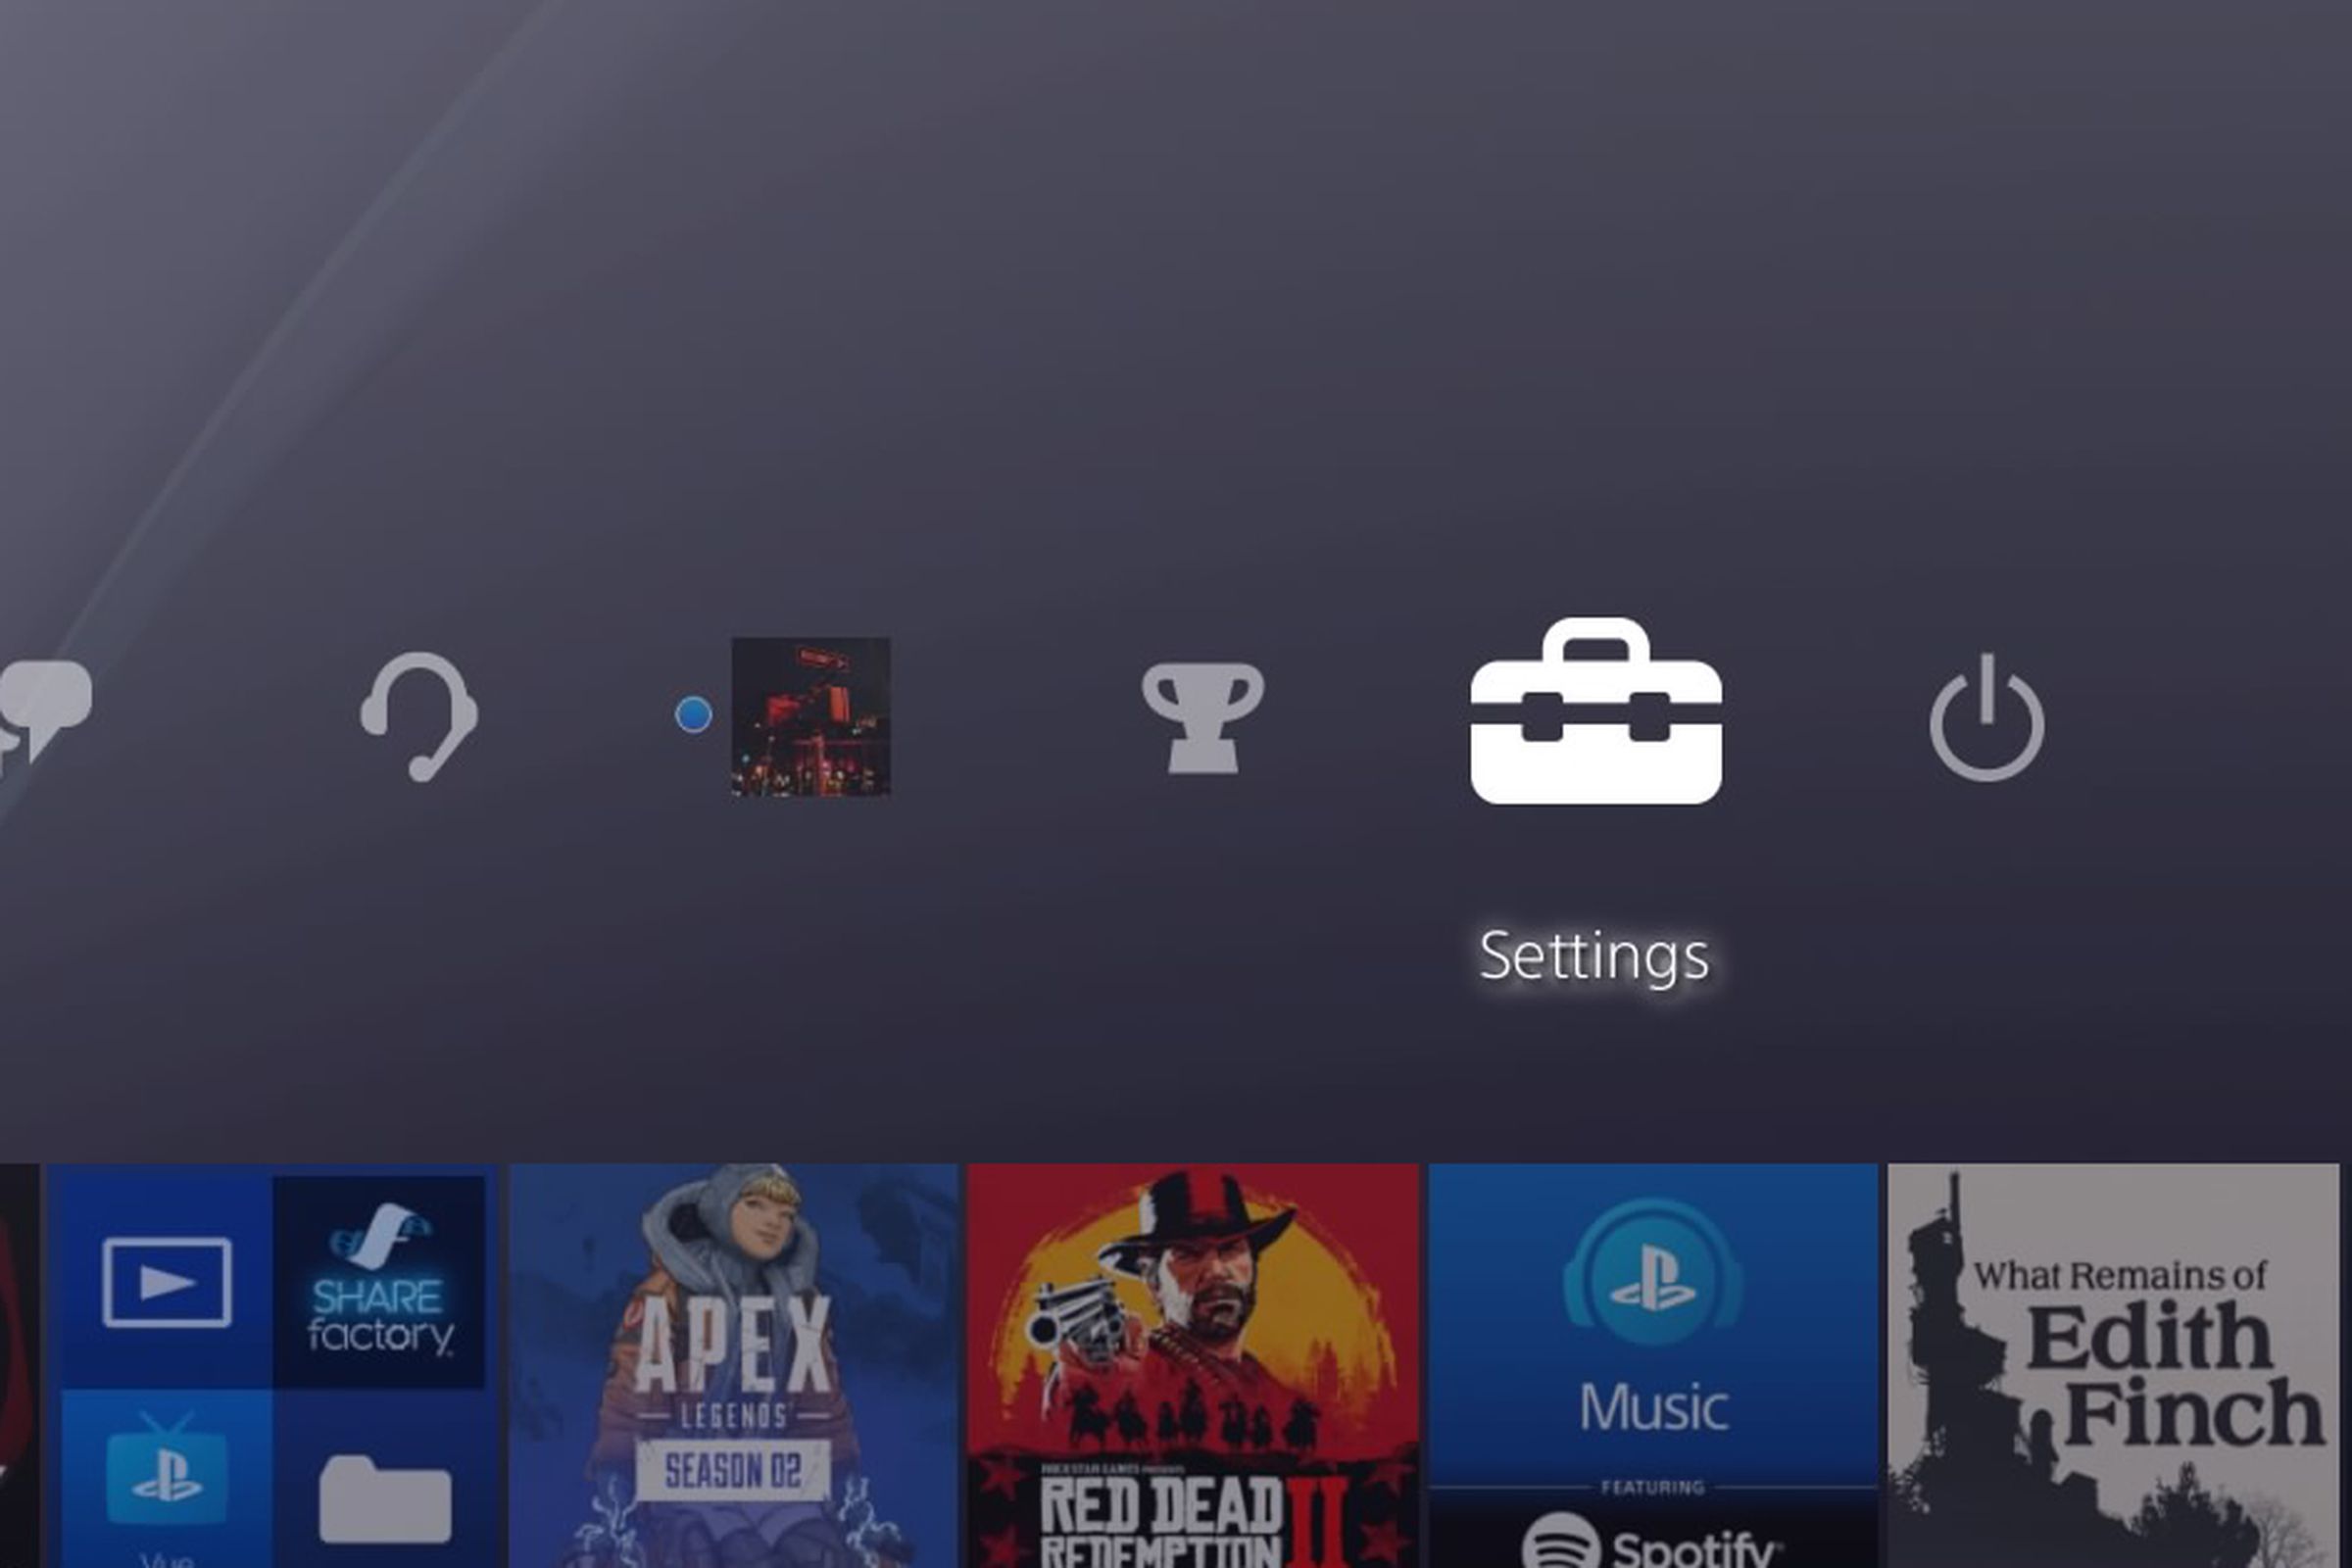 The Settings menu is on the far right of the home screen on PS4